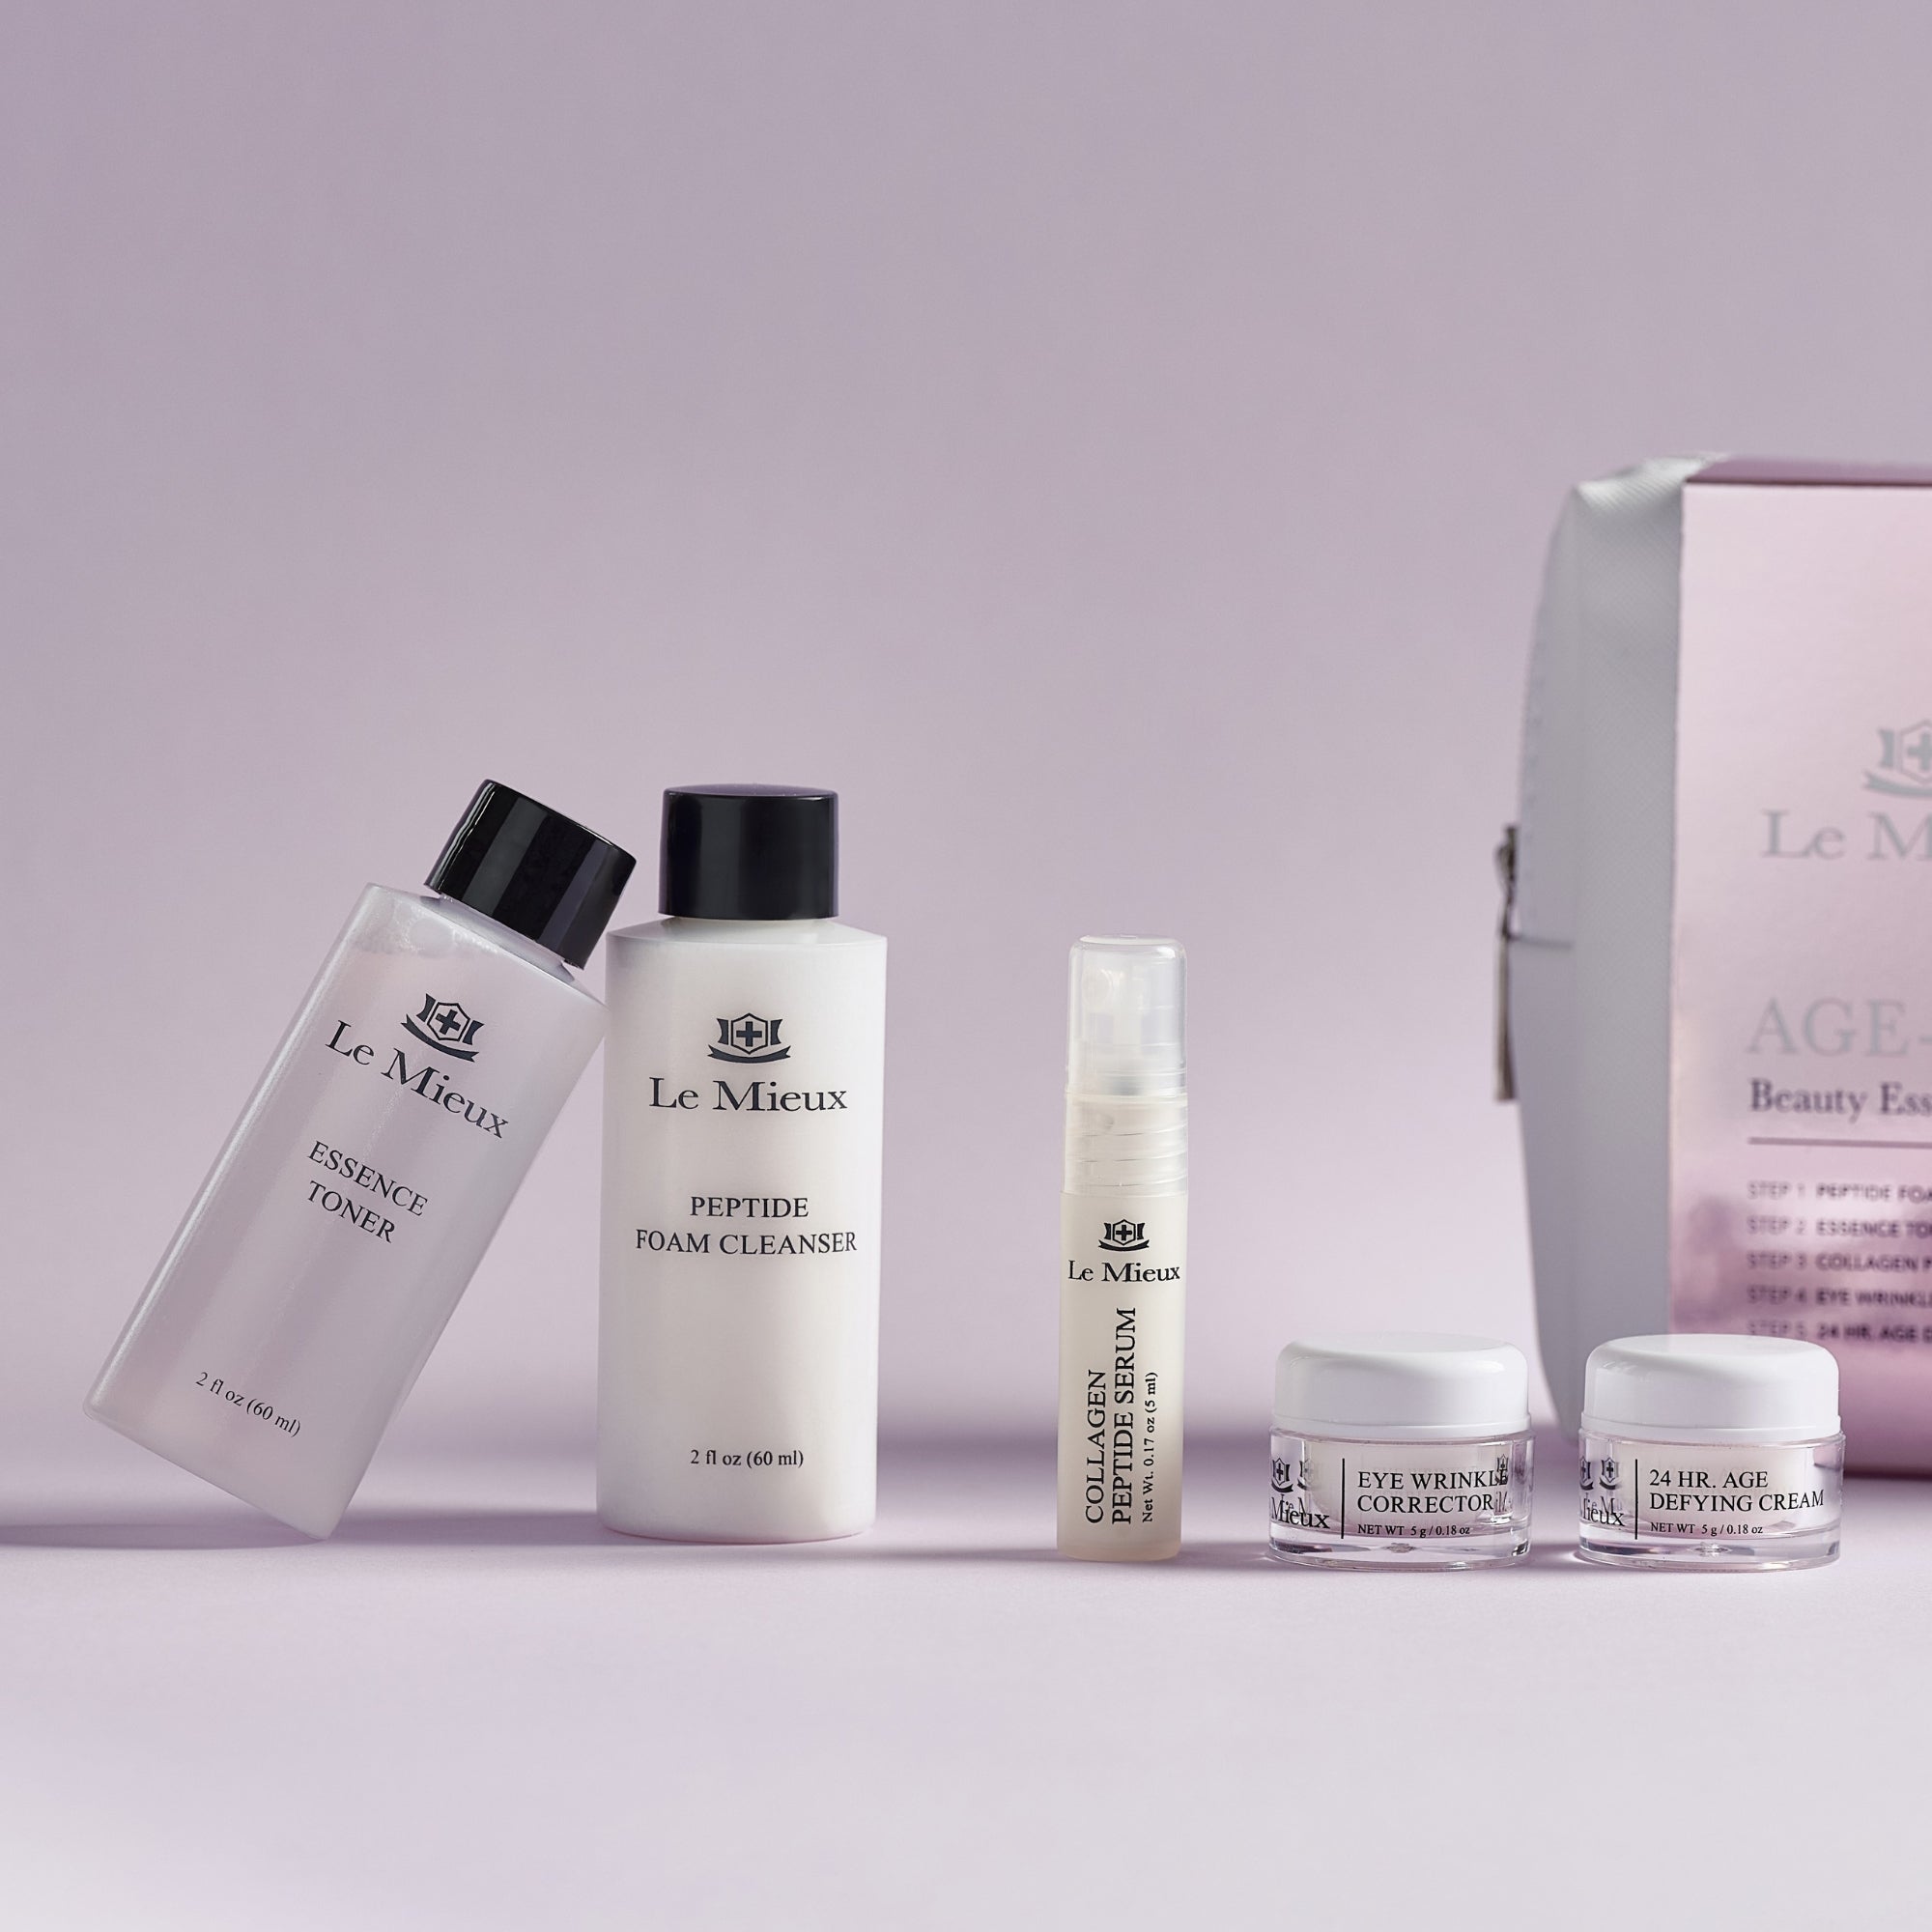  AGE-DEFYING BEAUTY ESSENTIALS from Le Mieux Skincare - 4